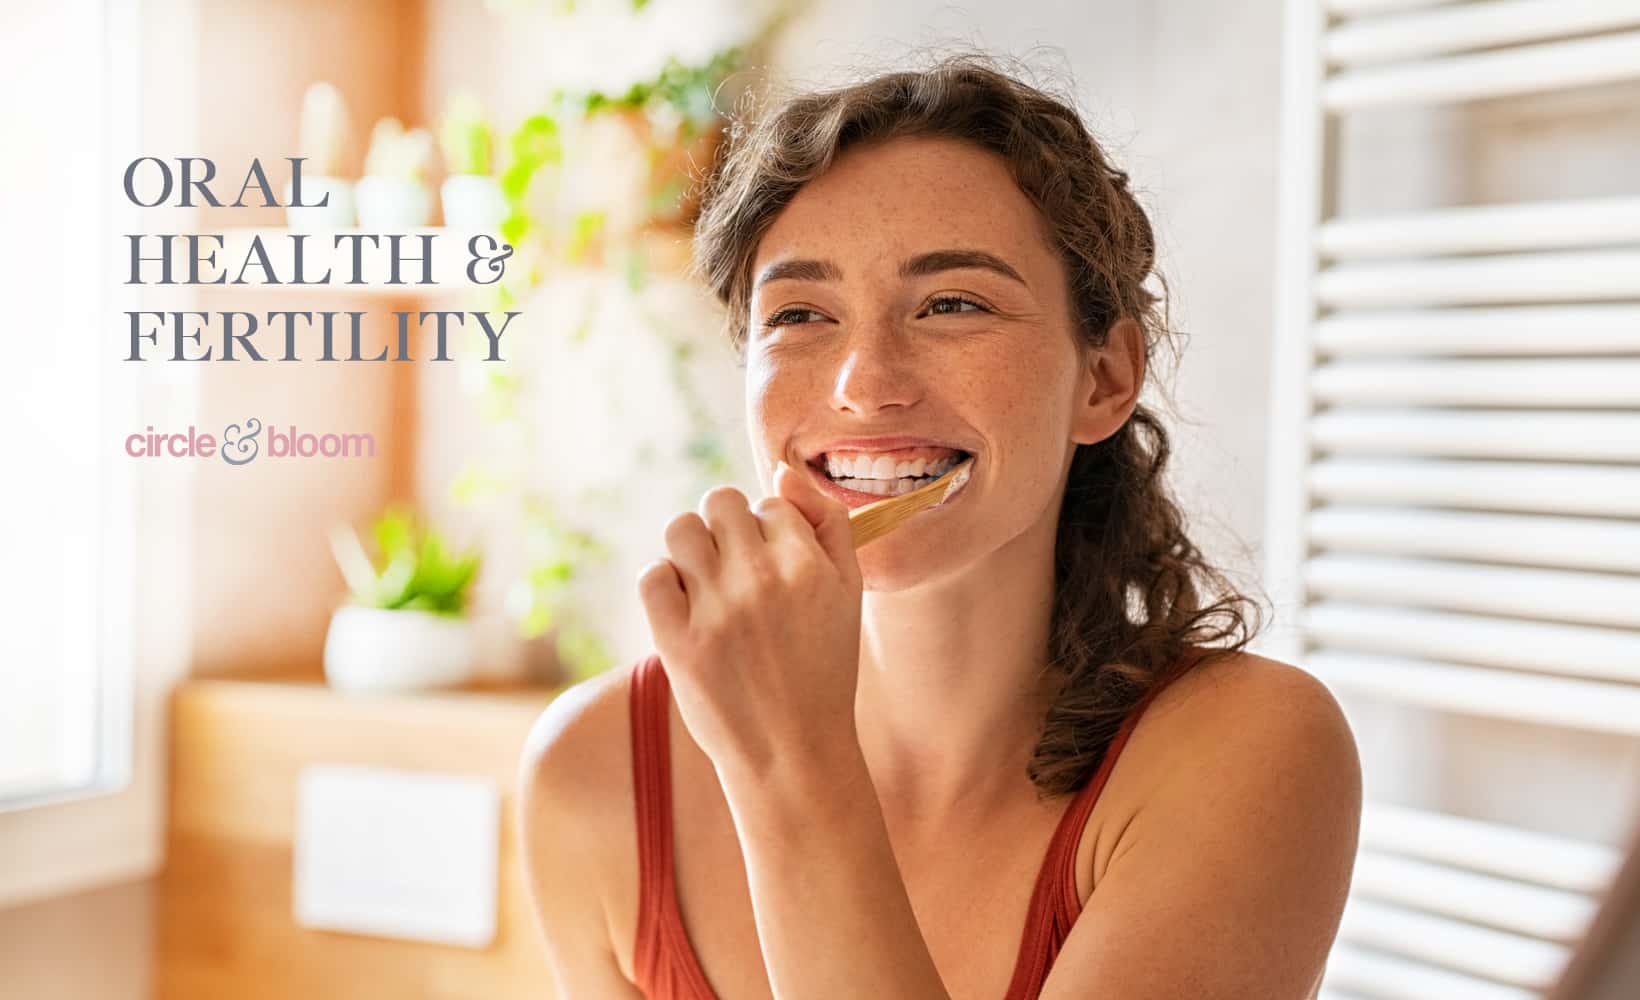 The Connection Between Oral Health and Fertility